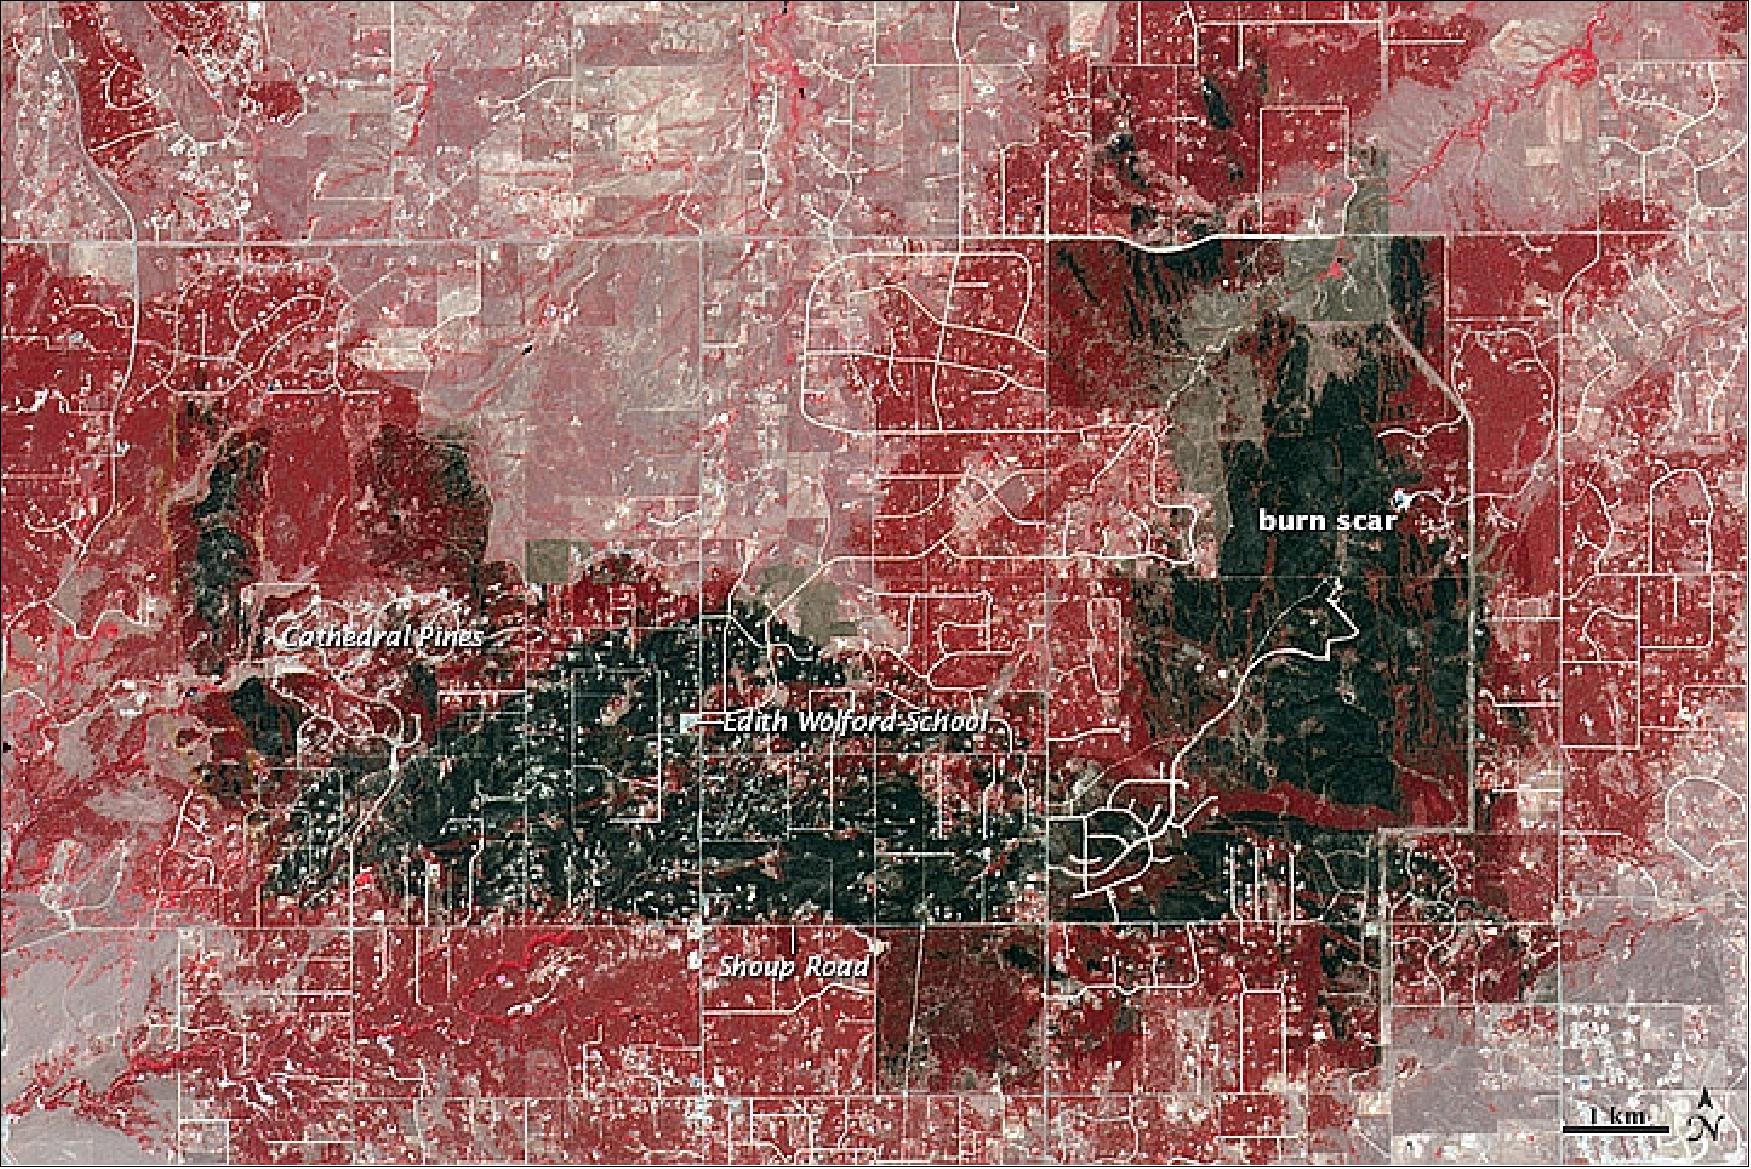 Figure 112: Aftermath of Colorado's most destructive wildfire observed by the ASTER instrument on the Terra satellite on June 21, 2013 (image credit: NASA)